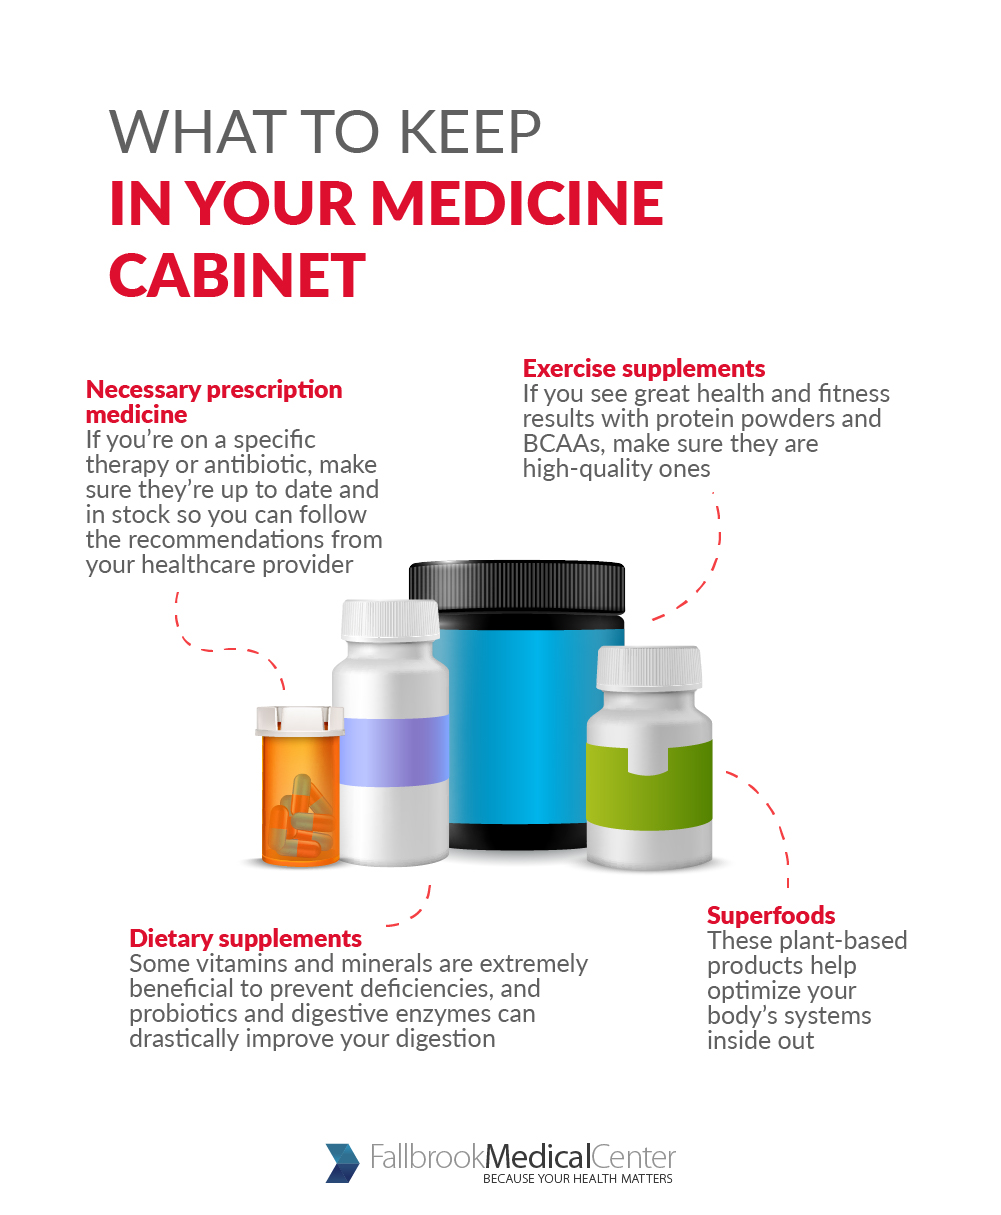 What to Keep in Your Medicine Cabinet?